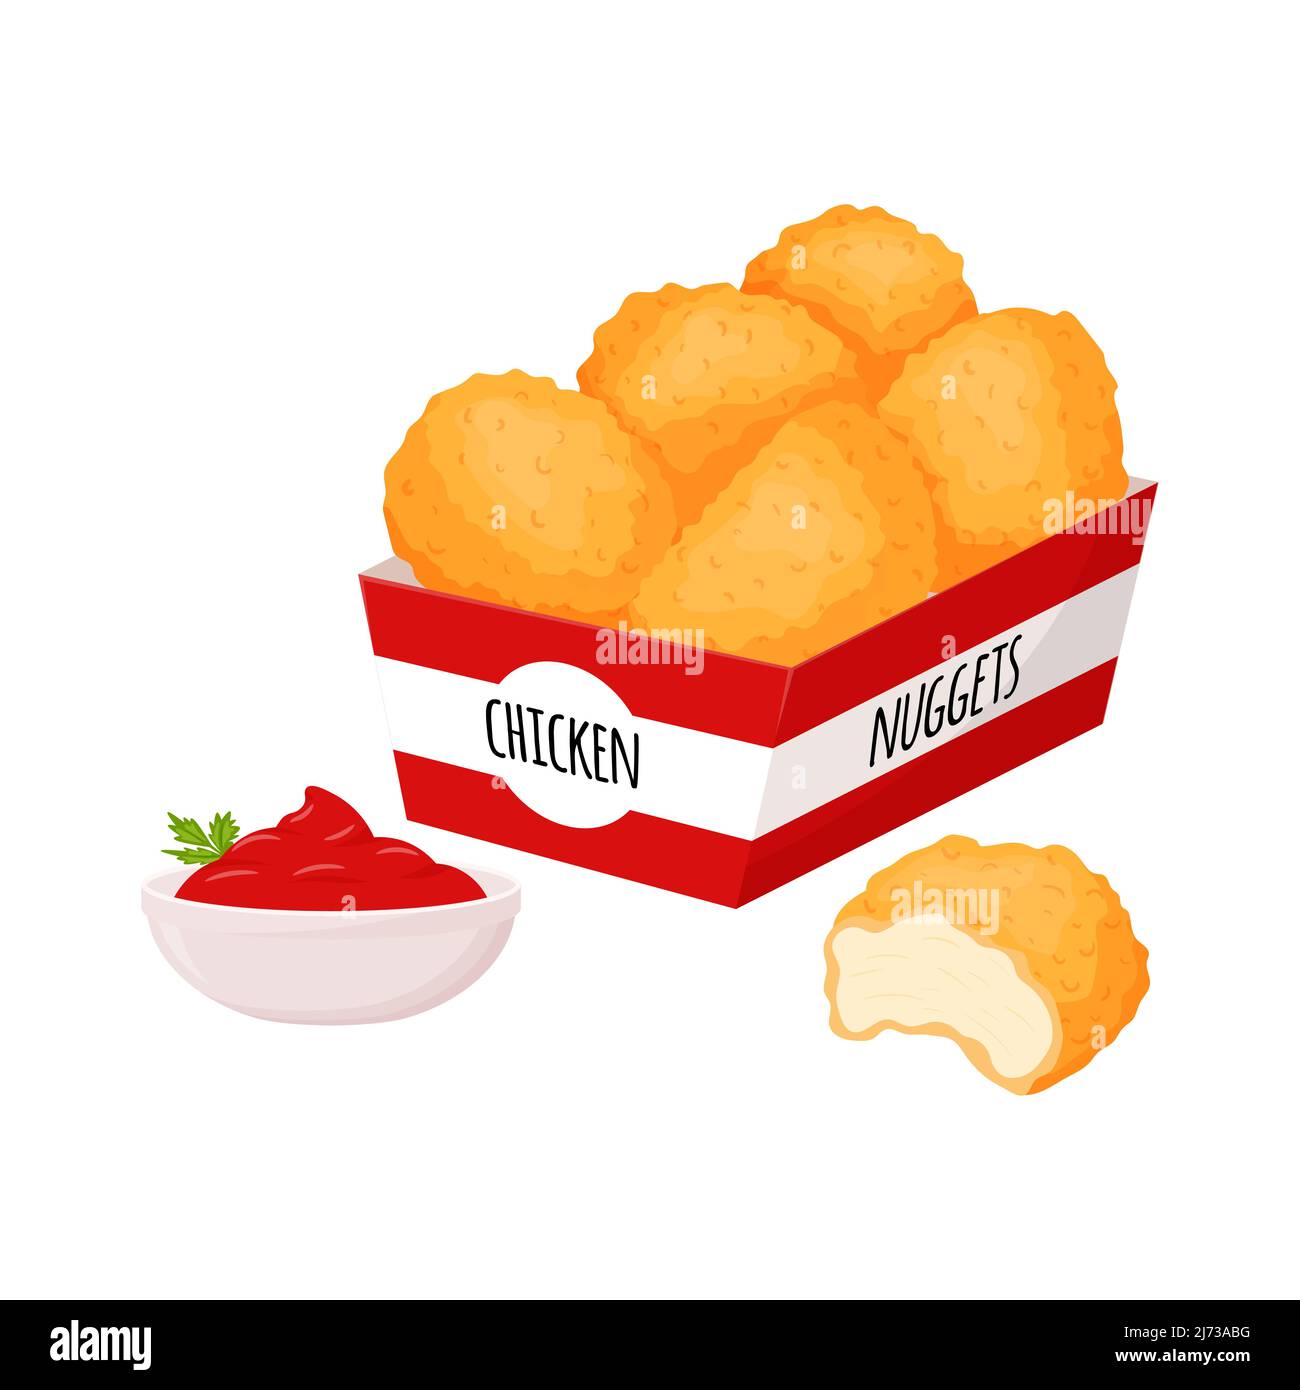 Chicken Nugget Clipart, Chicken Nuggets, Digital Download Design, Fast Food  Clipart, Png Files, Chicken Nugget Box, Favorite Things, PNG - Etsy